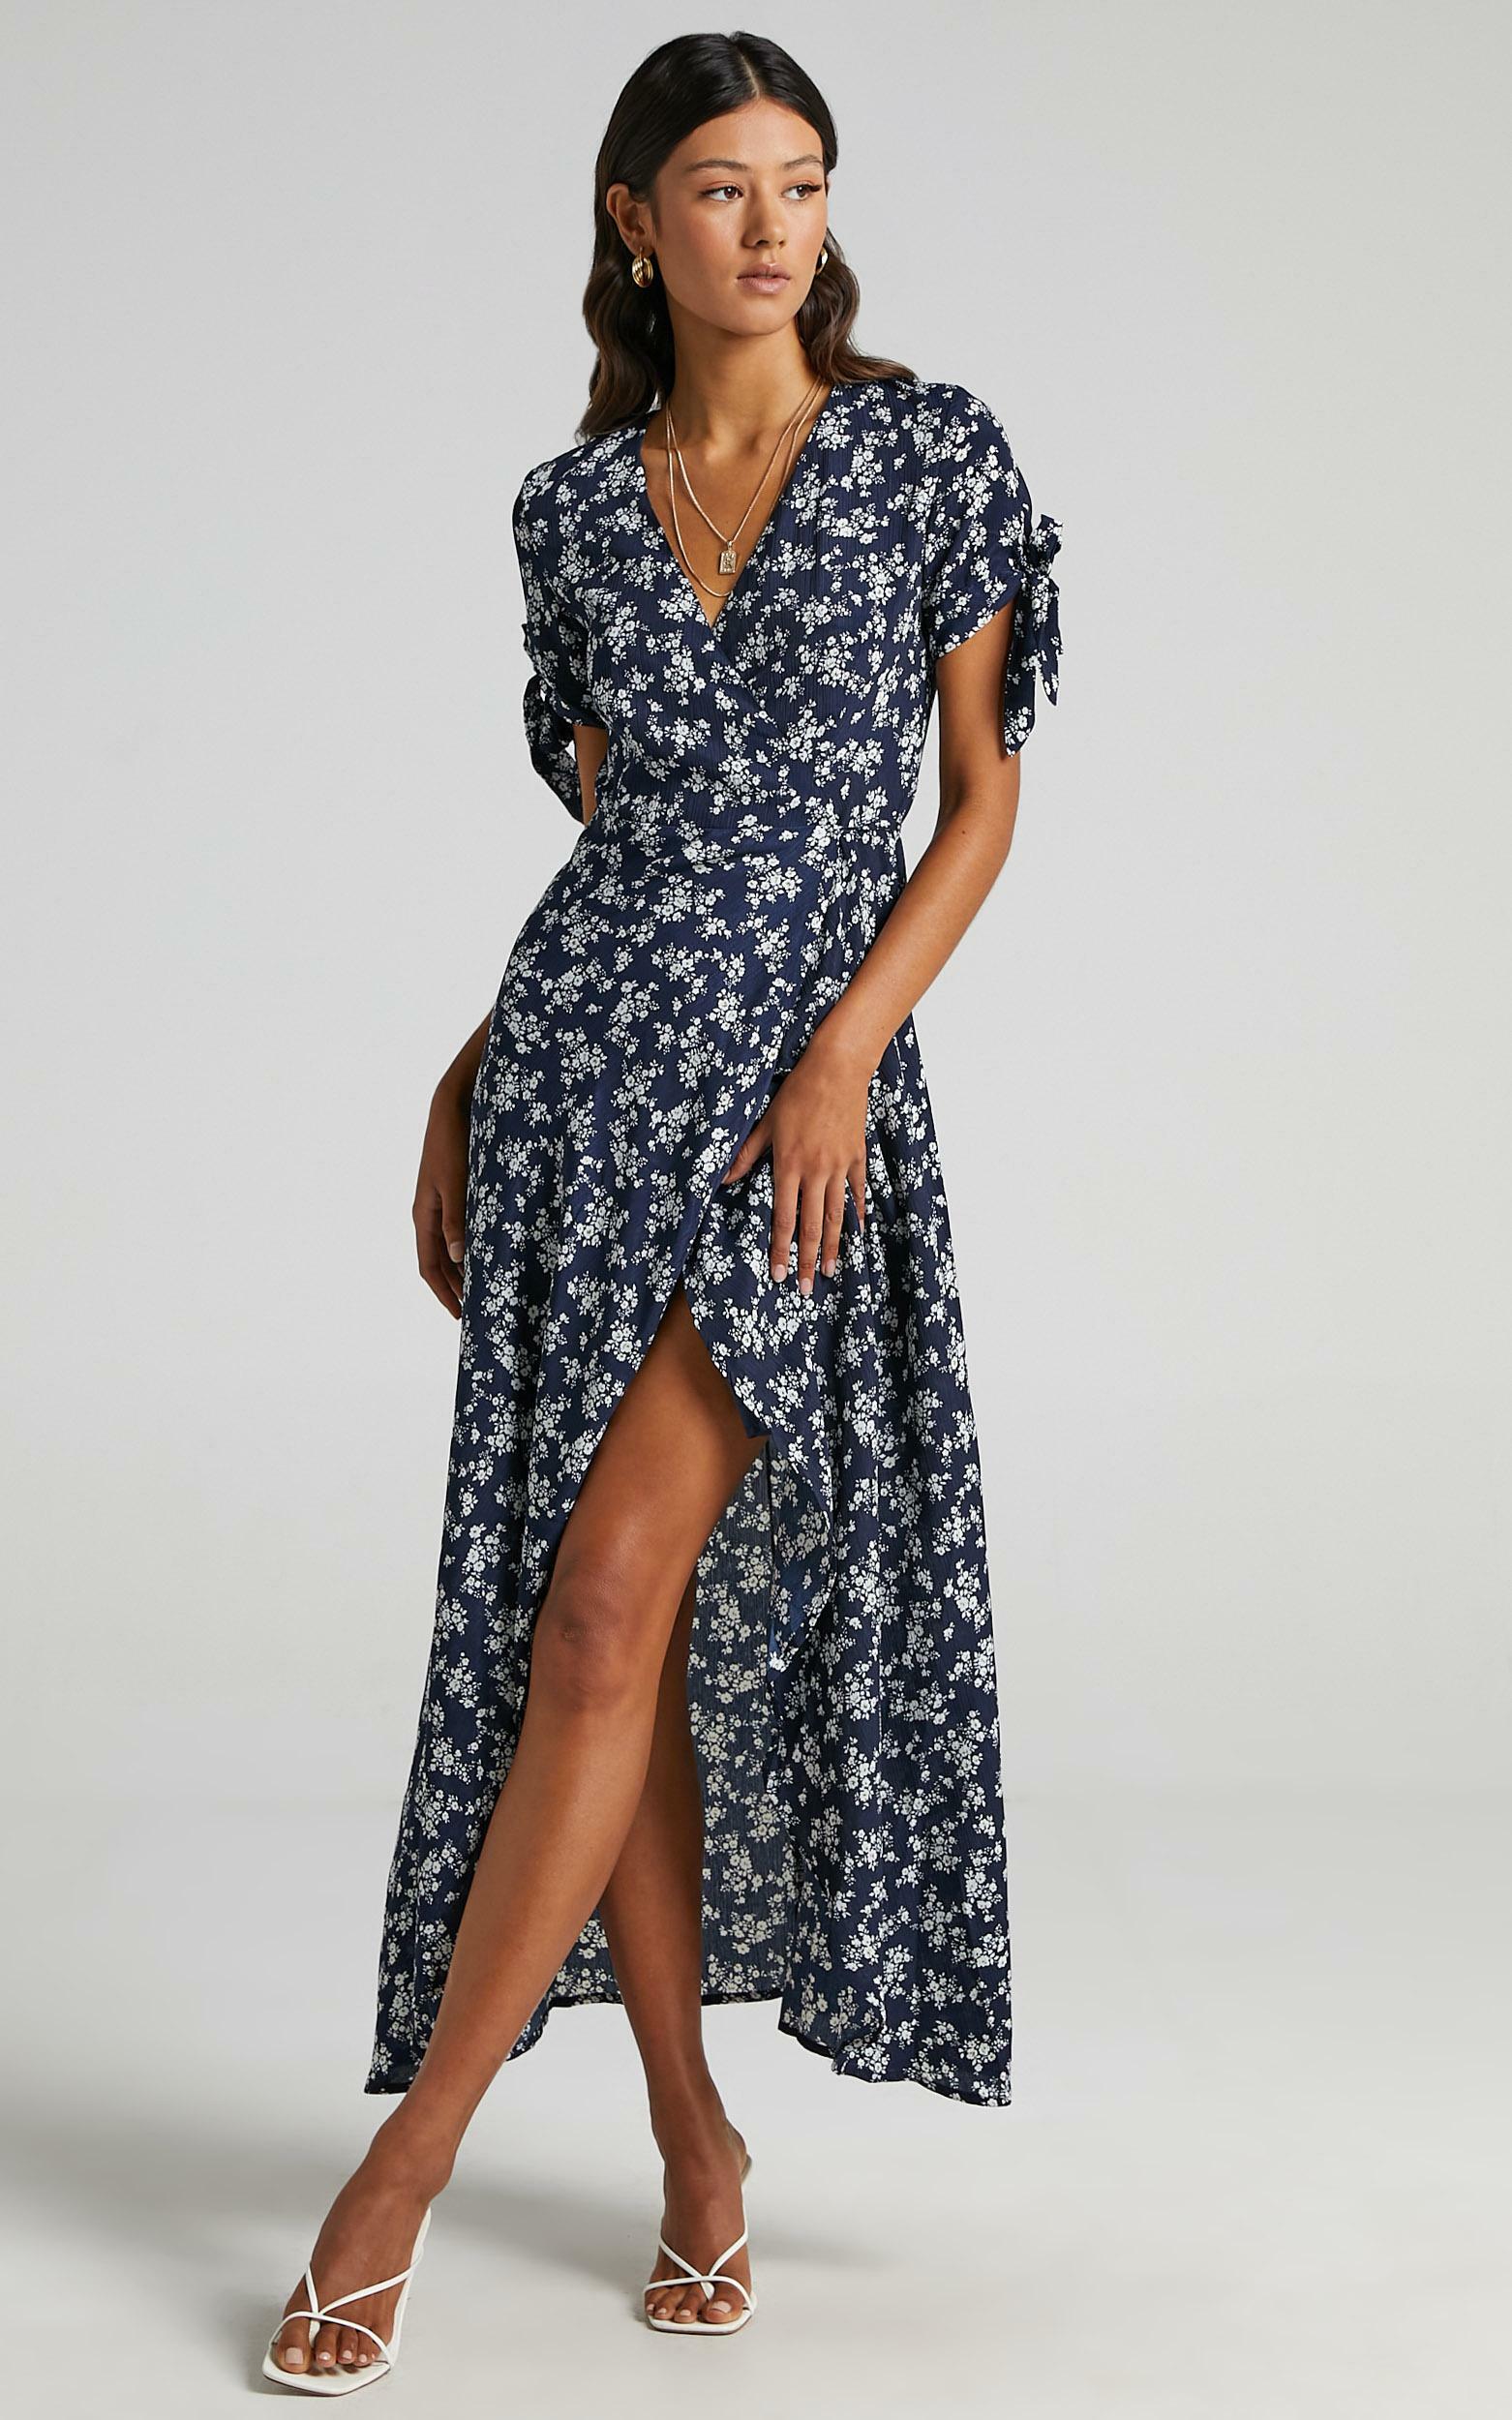 Up Wrap Maxi Dress in Navy Floral | Showpo